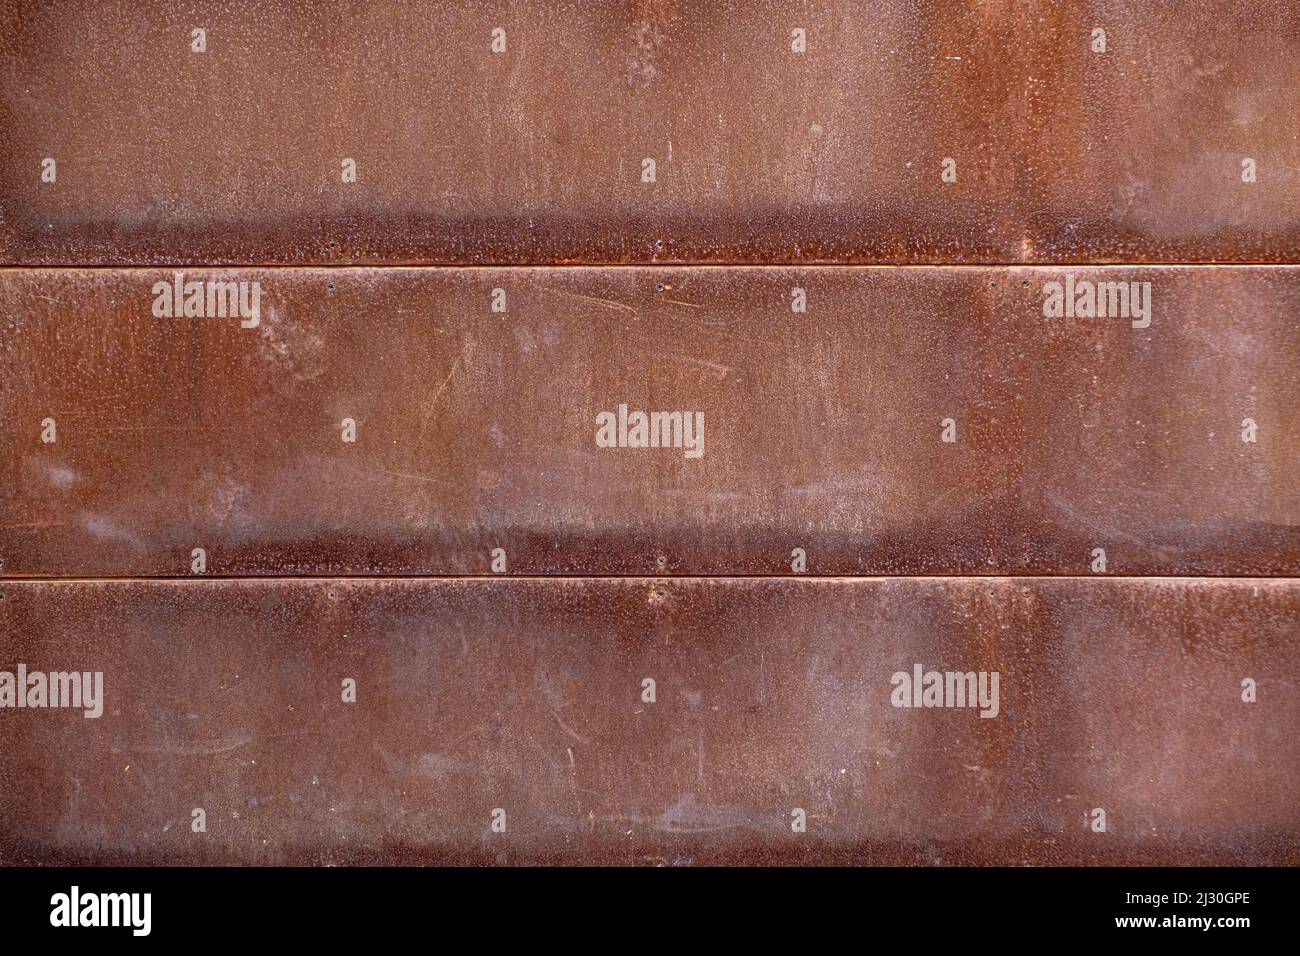 Rusted metal texture or old metal wall background with rusty tiles Stock Photo